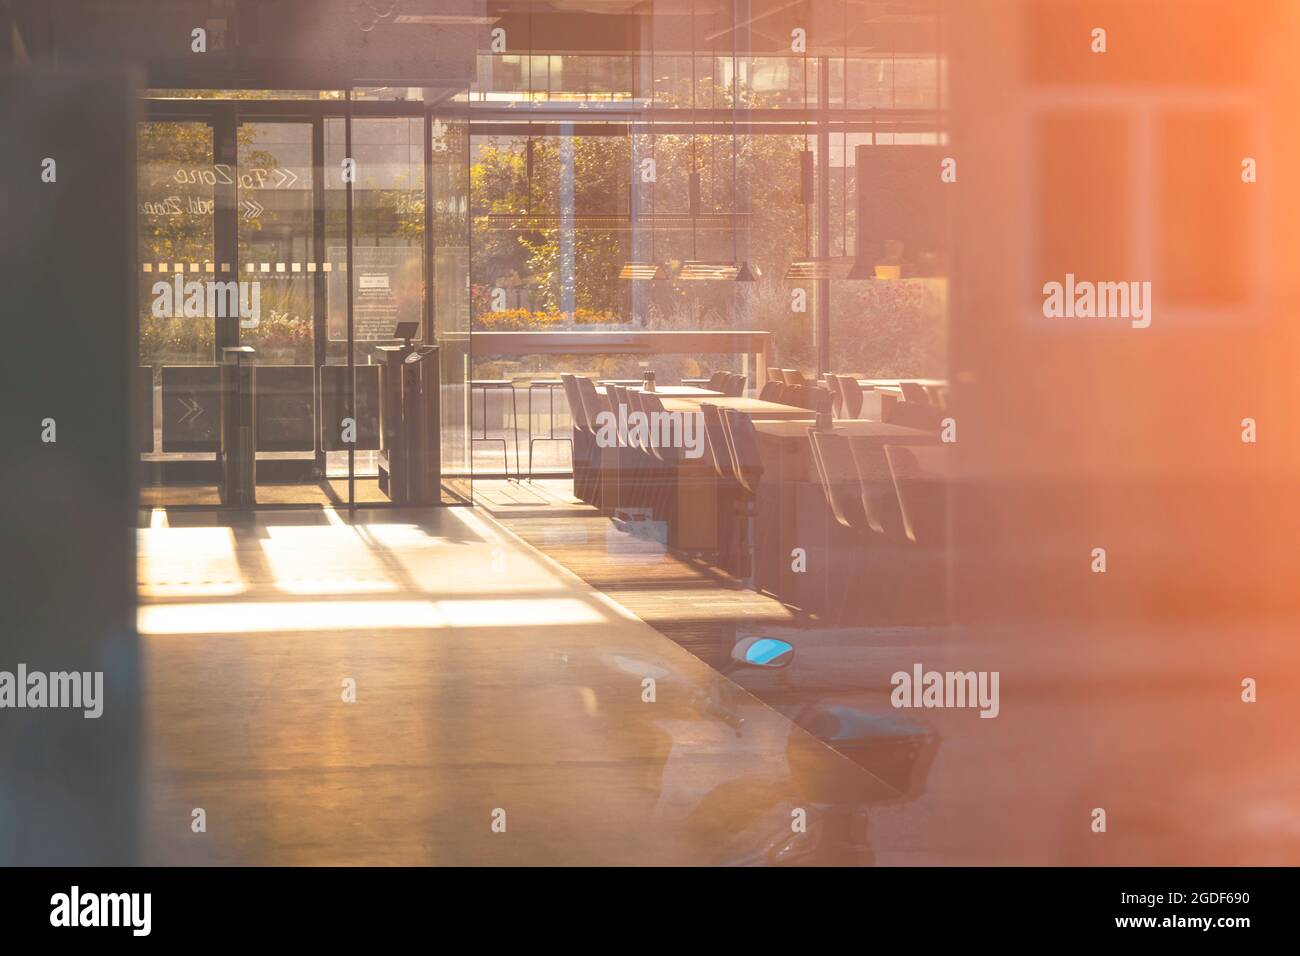 View into an empty cafe through the glass with reflection. Morning light shining spring. Stock Photo